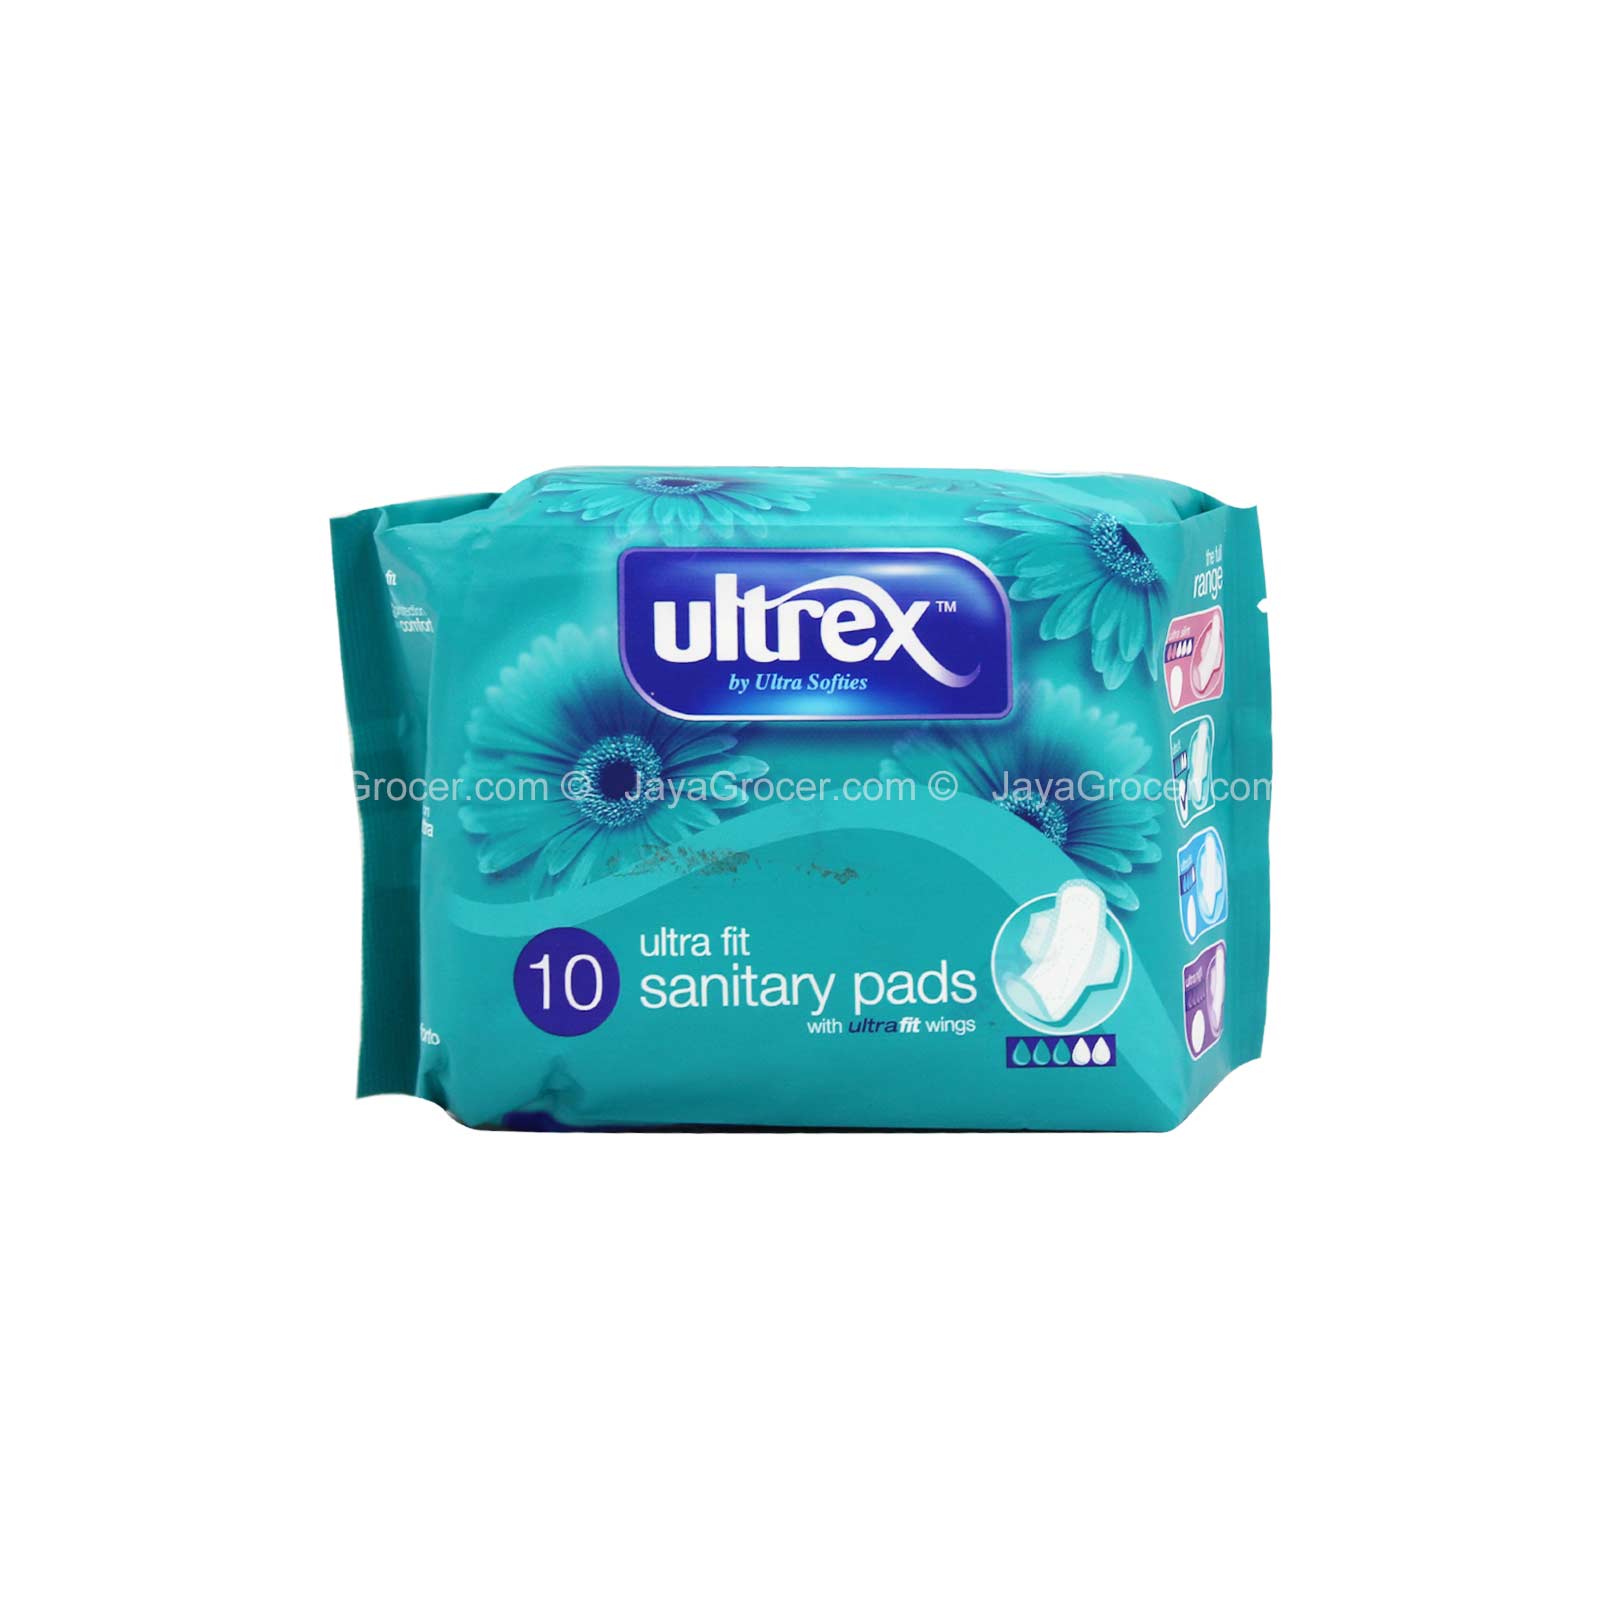 Ultrex Ultra Fit Sanitary Pads with Ultra Fit Wings 10pcs